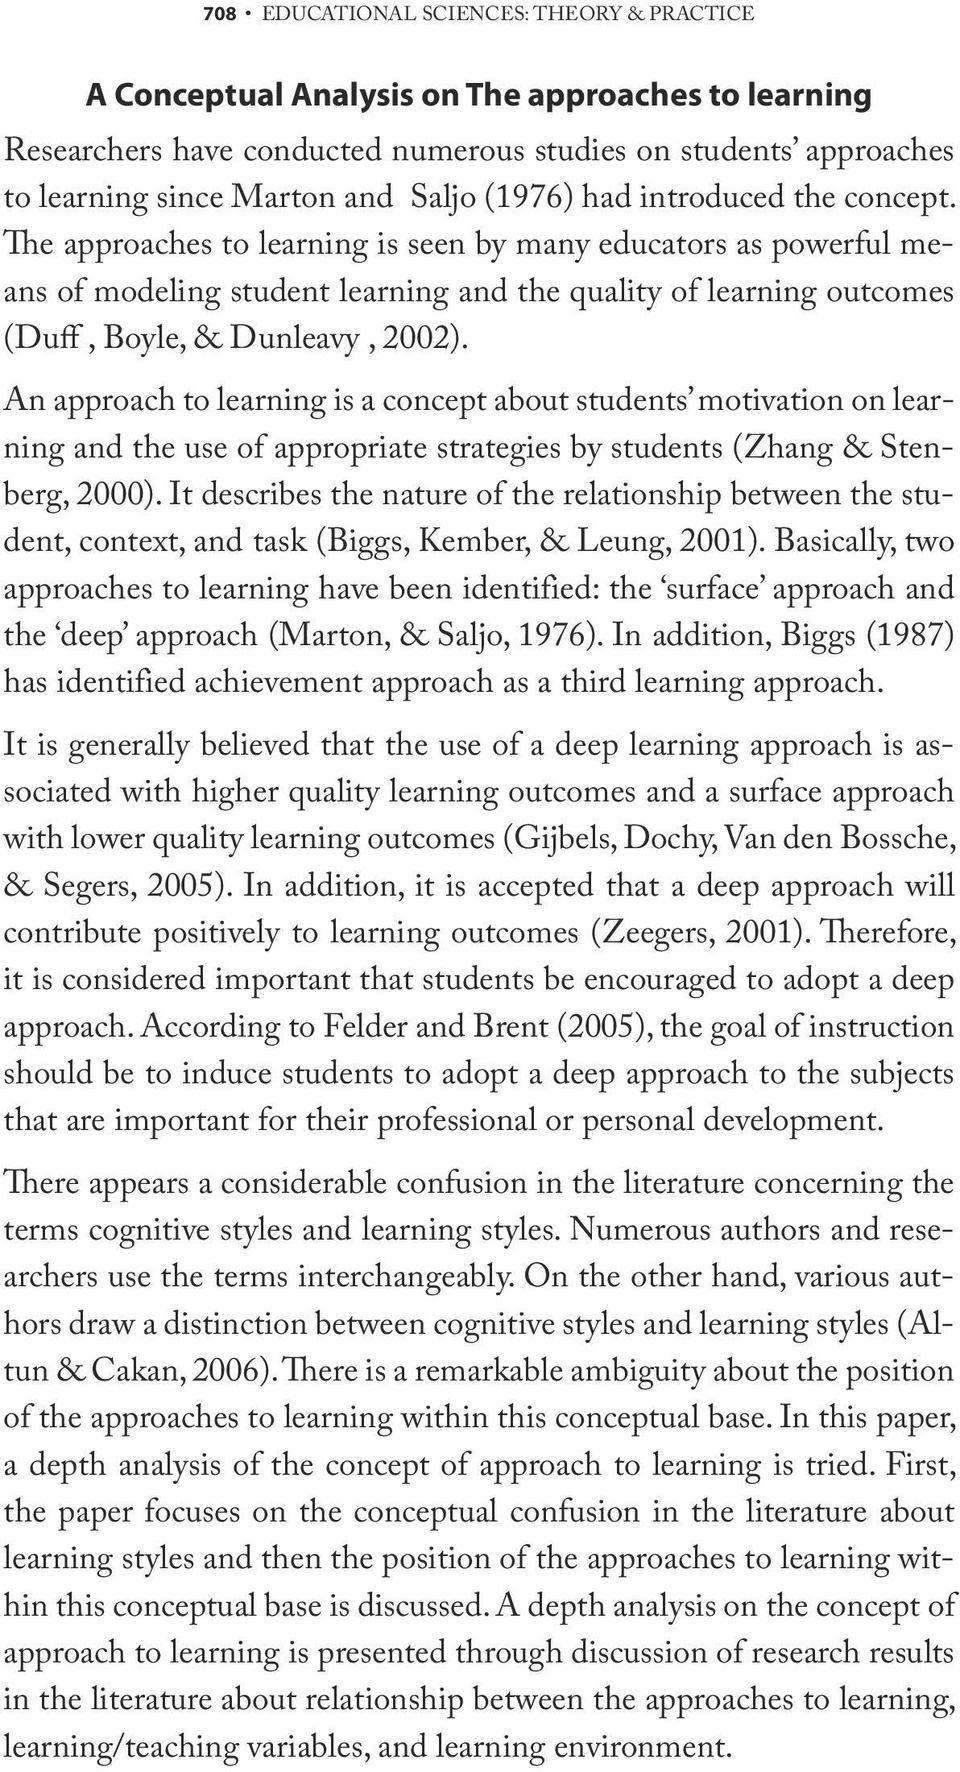 The approaches to learning is seen by many educators as powerful means of modeling student learning and the quality of learning outcomes (Duff, Boyle, & Dunleavy, 2002).